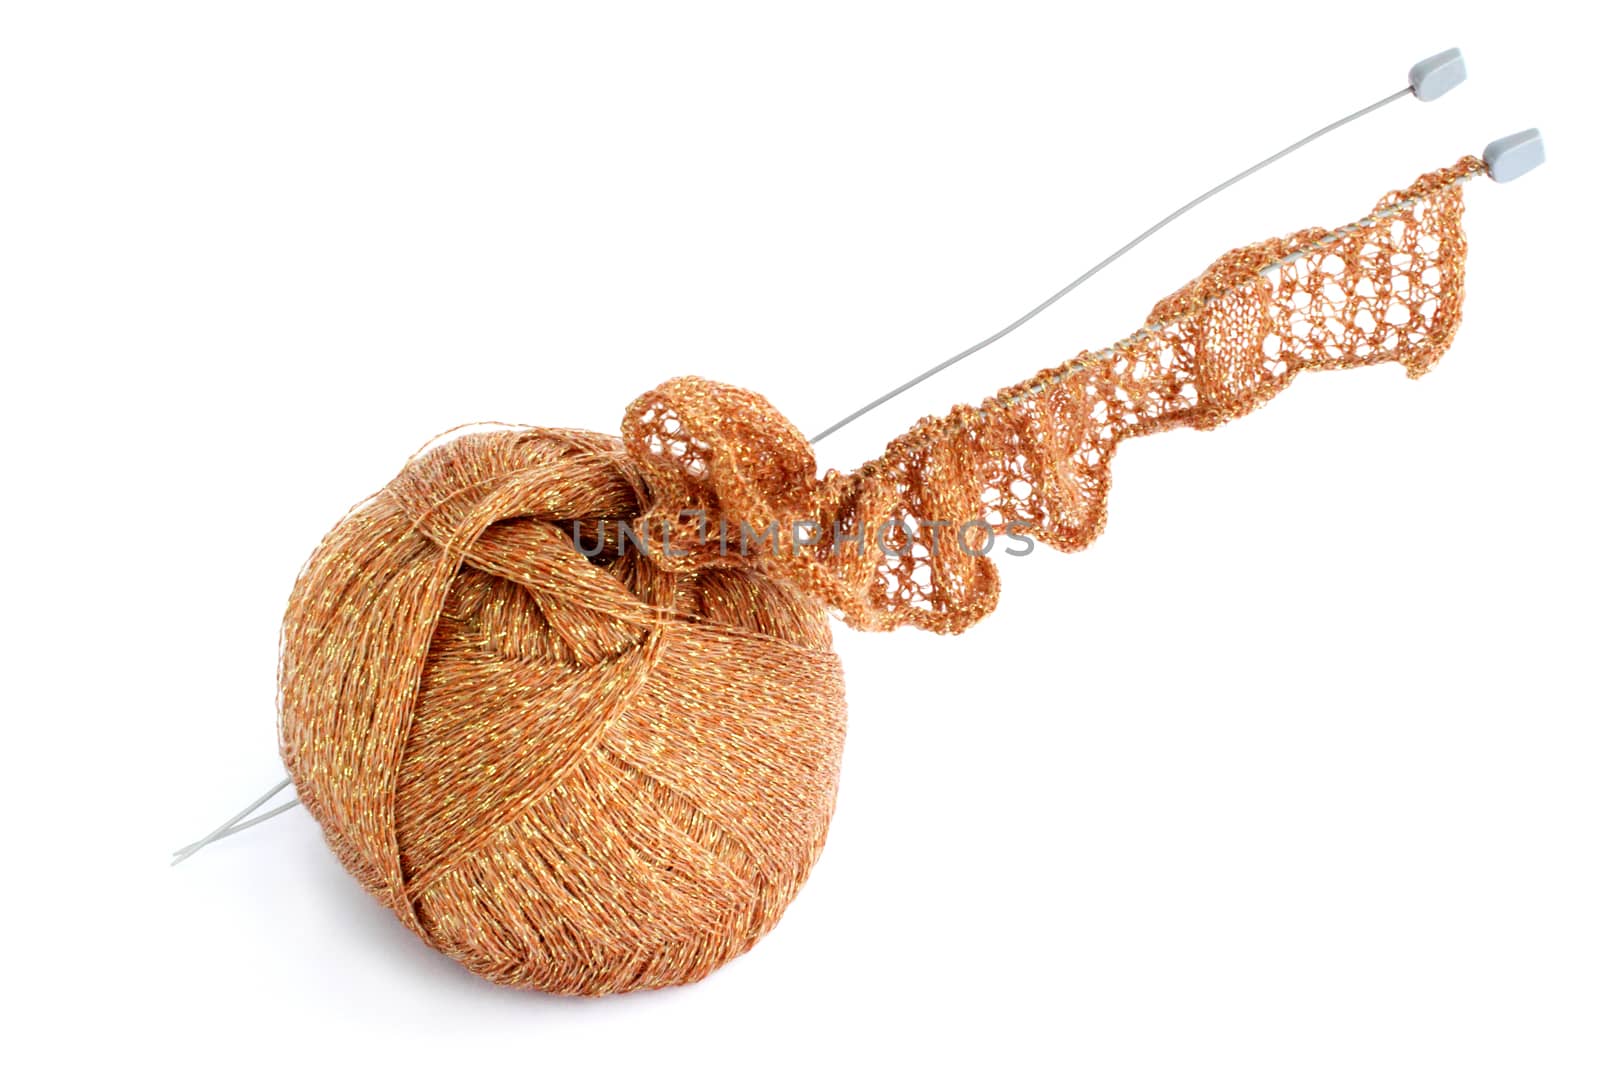 Ball of threads and knitting needle against the white background